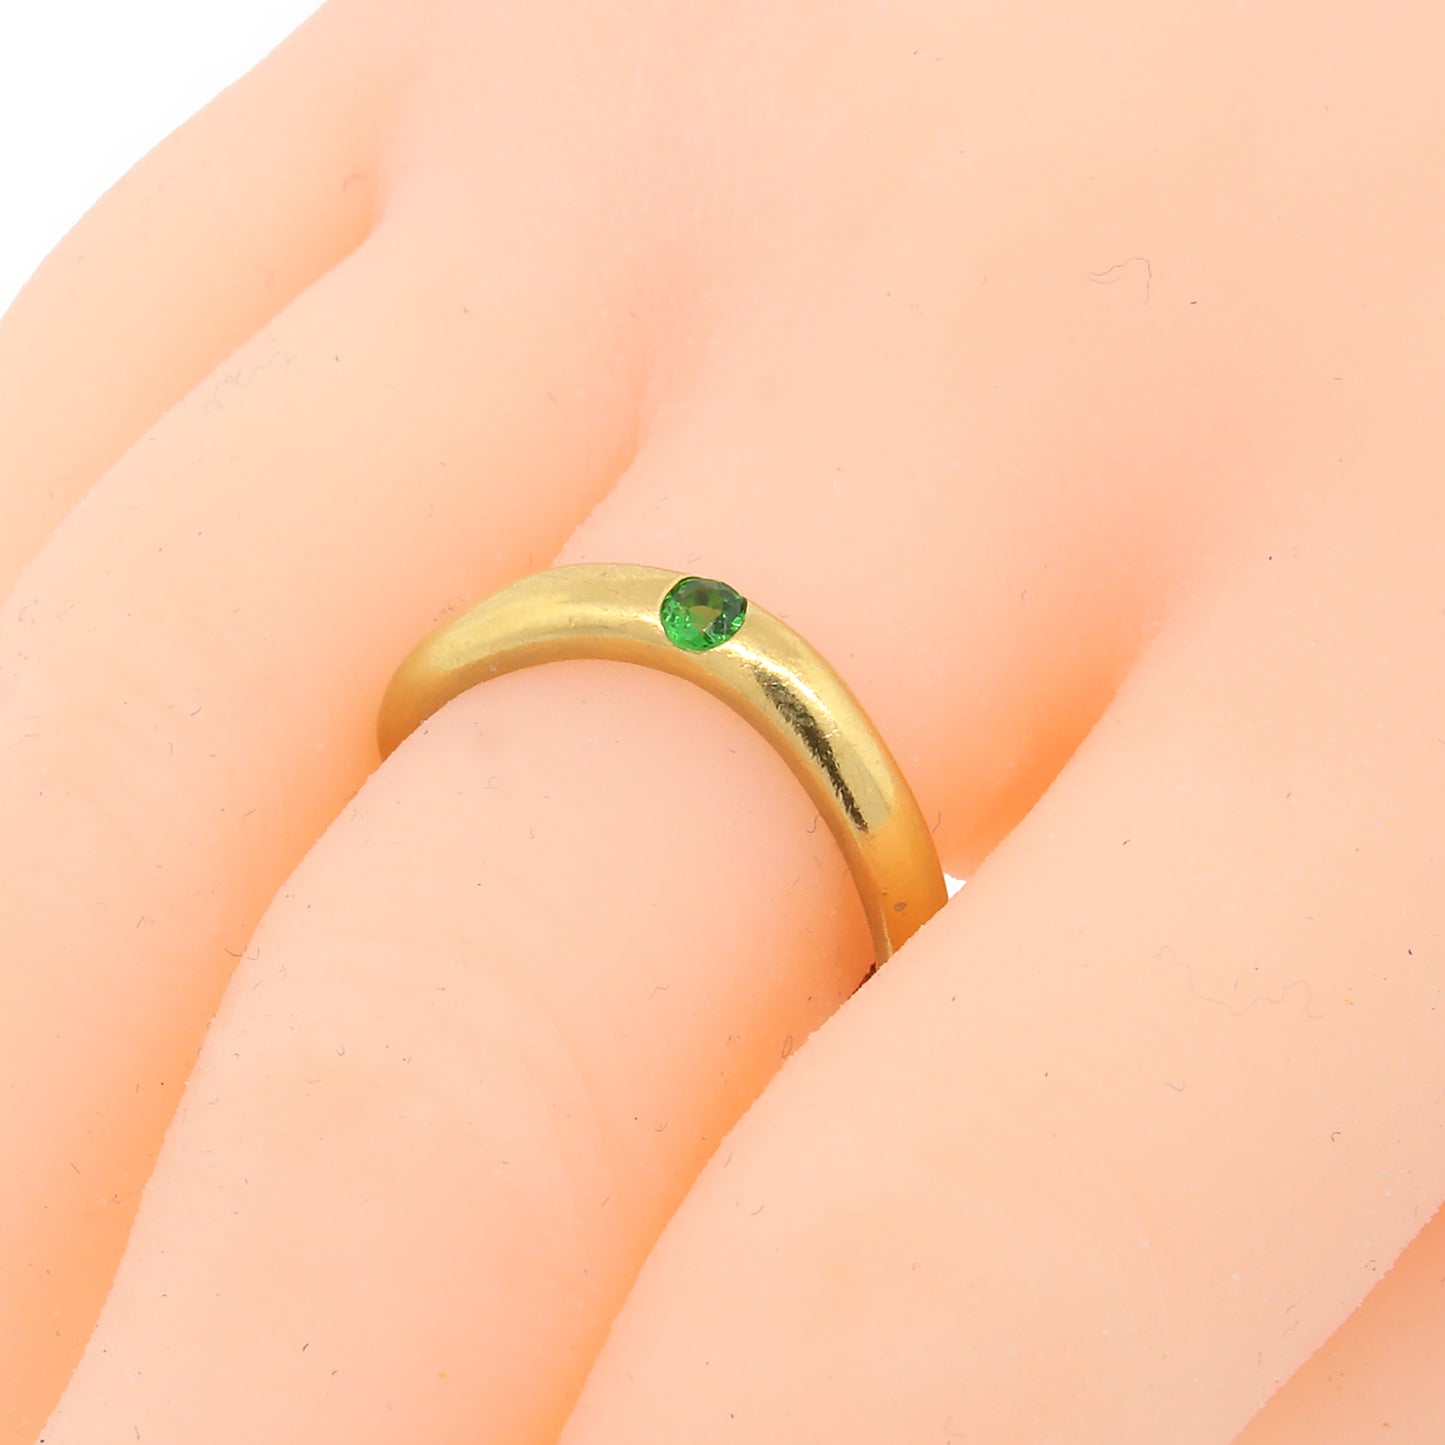 Load image into Gallery viewer, Angela Cummings Chrome Diopside Gold Curved Ring Size 8.5
